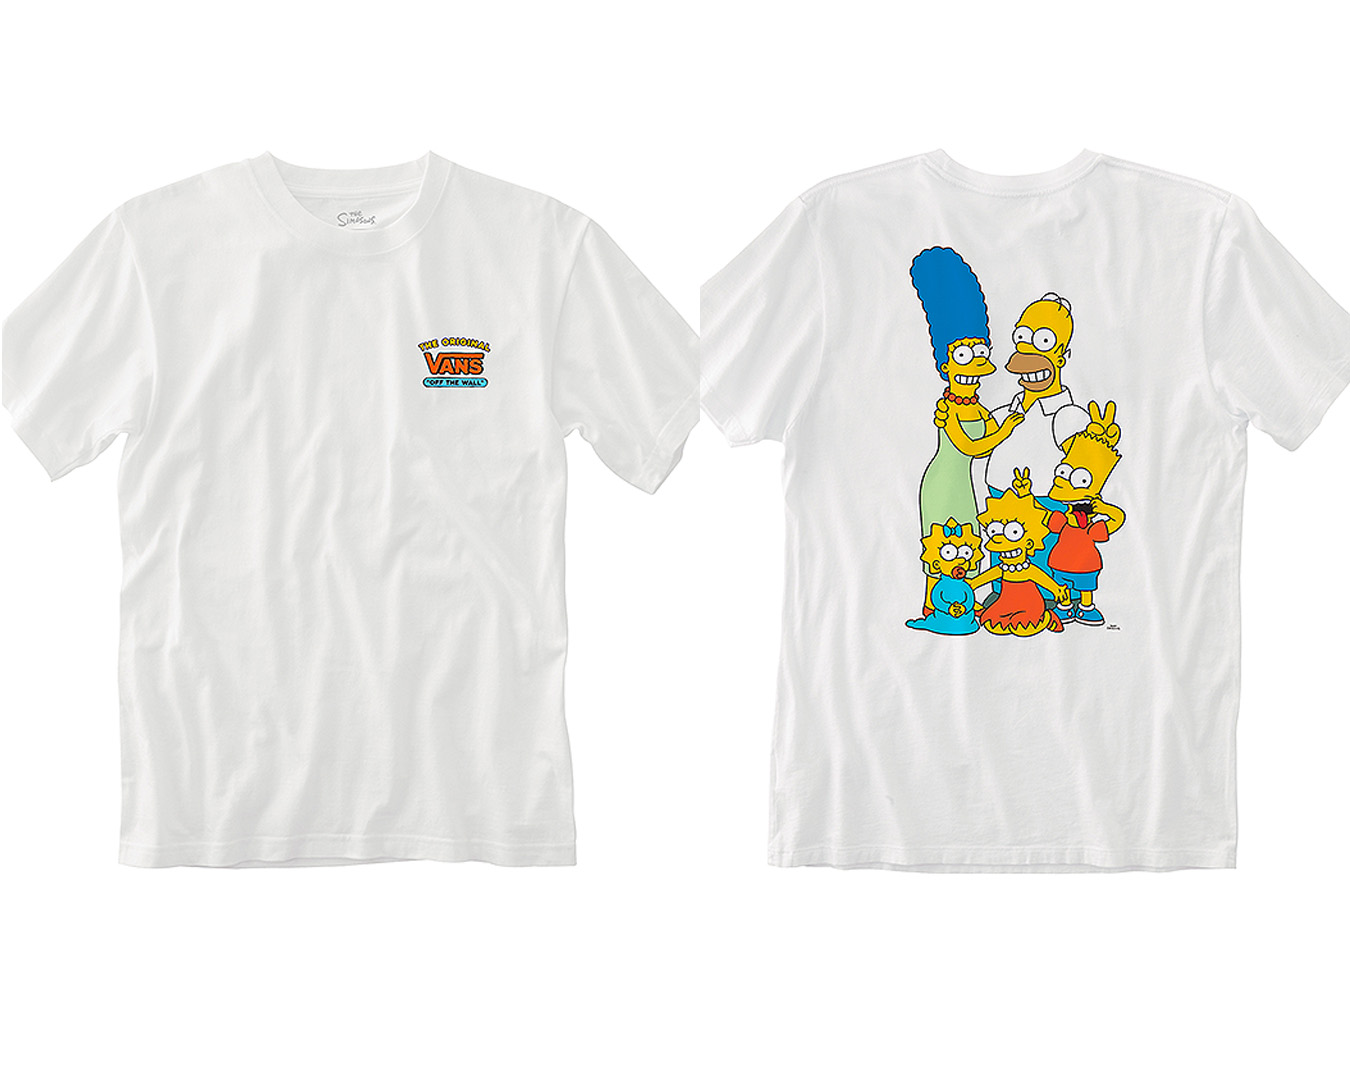 The front and back view of the Simpsons x Vans collab tshirt.